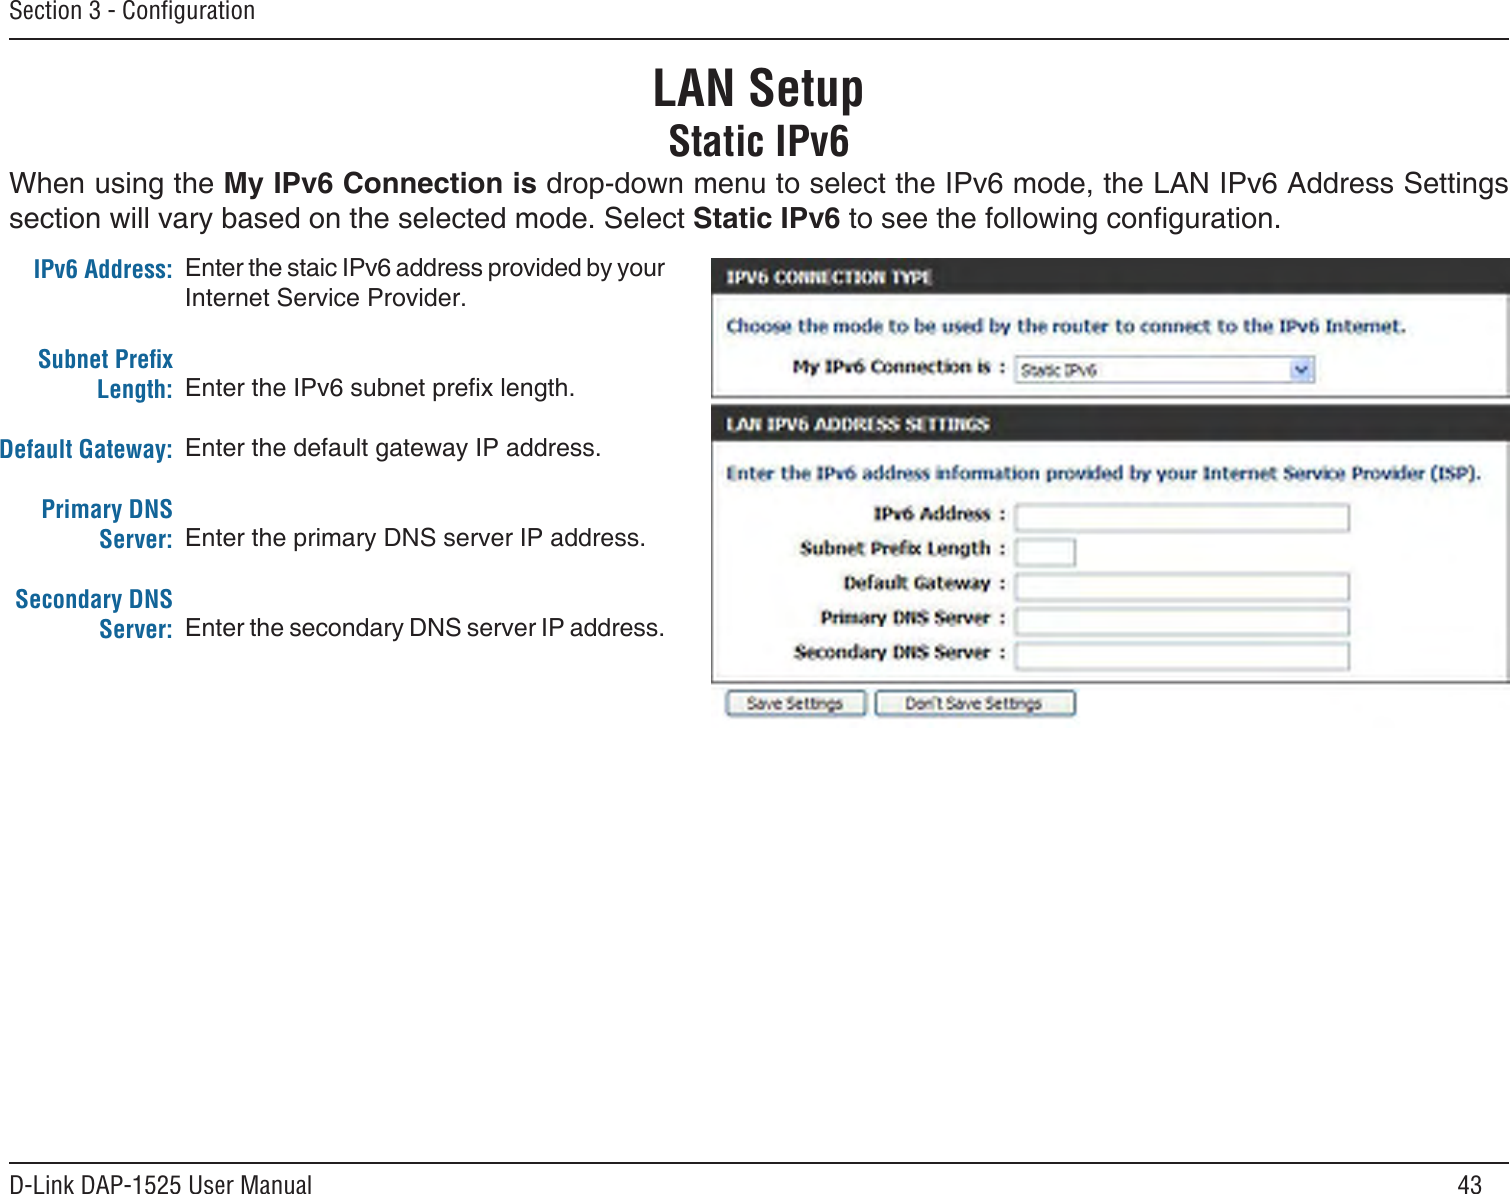 43D-Link DAP-1525 User ManualSection 3 - ConﬁgurationLAN SetupStatic IPv6Enter the staic IPv6 address provided by your Internet Service Provider.Enter the IPv6 subnet prex length.Enter the default gateway IP address.Enter the primary DNS server IP address.Enter the secondary DNS server IP address.IPv6 Address:Subnet Preﬁx Length:Default Gateway:Primary DNS Server:Secondary DNS Server:When using the My IPv6 Connection is drop-down menu to select the IPv6 mode, the LAN IPv6 Address Settings section will vary based on the selected mode. Select Static IPv6 to see the following conguration.